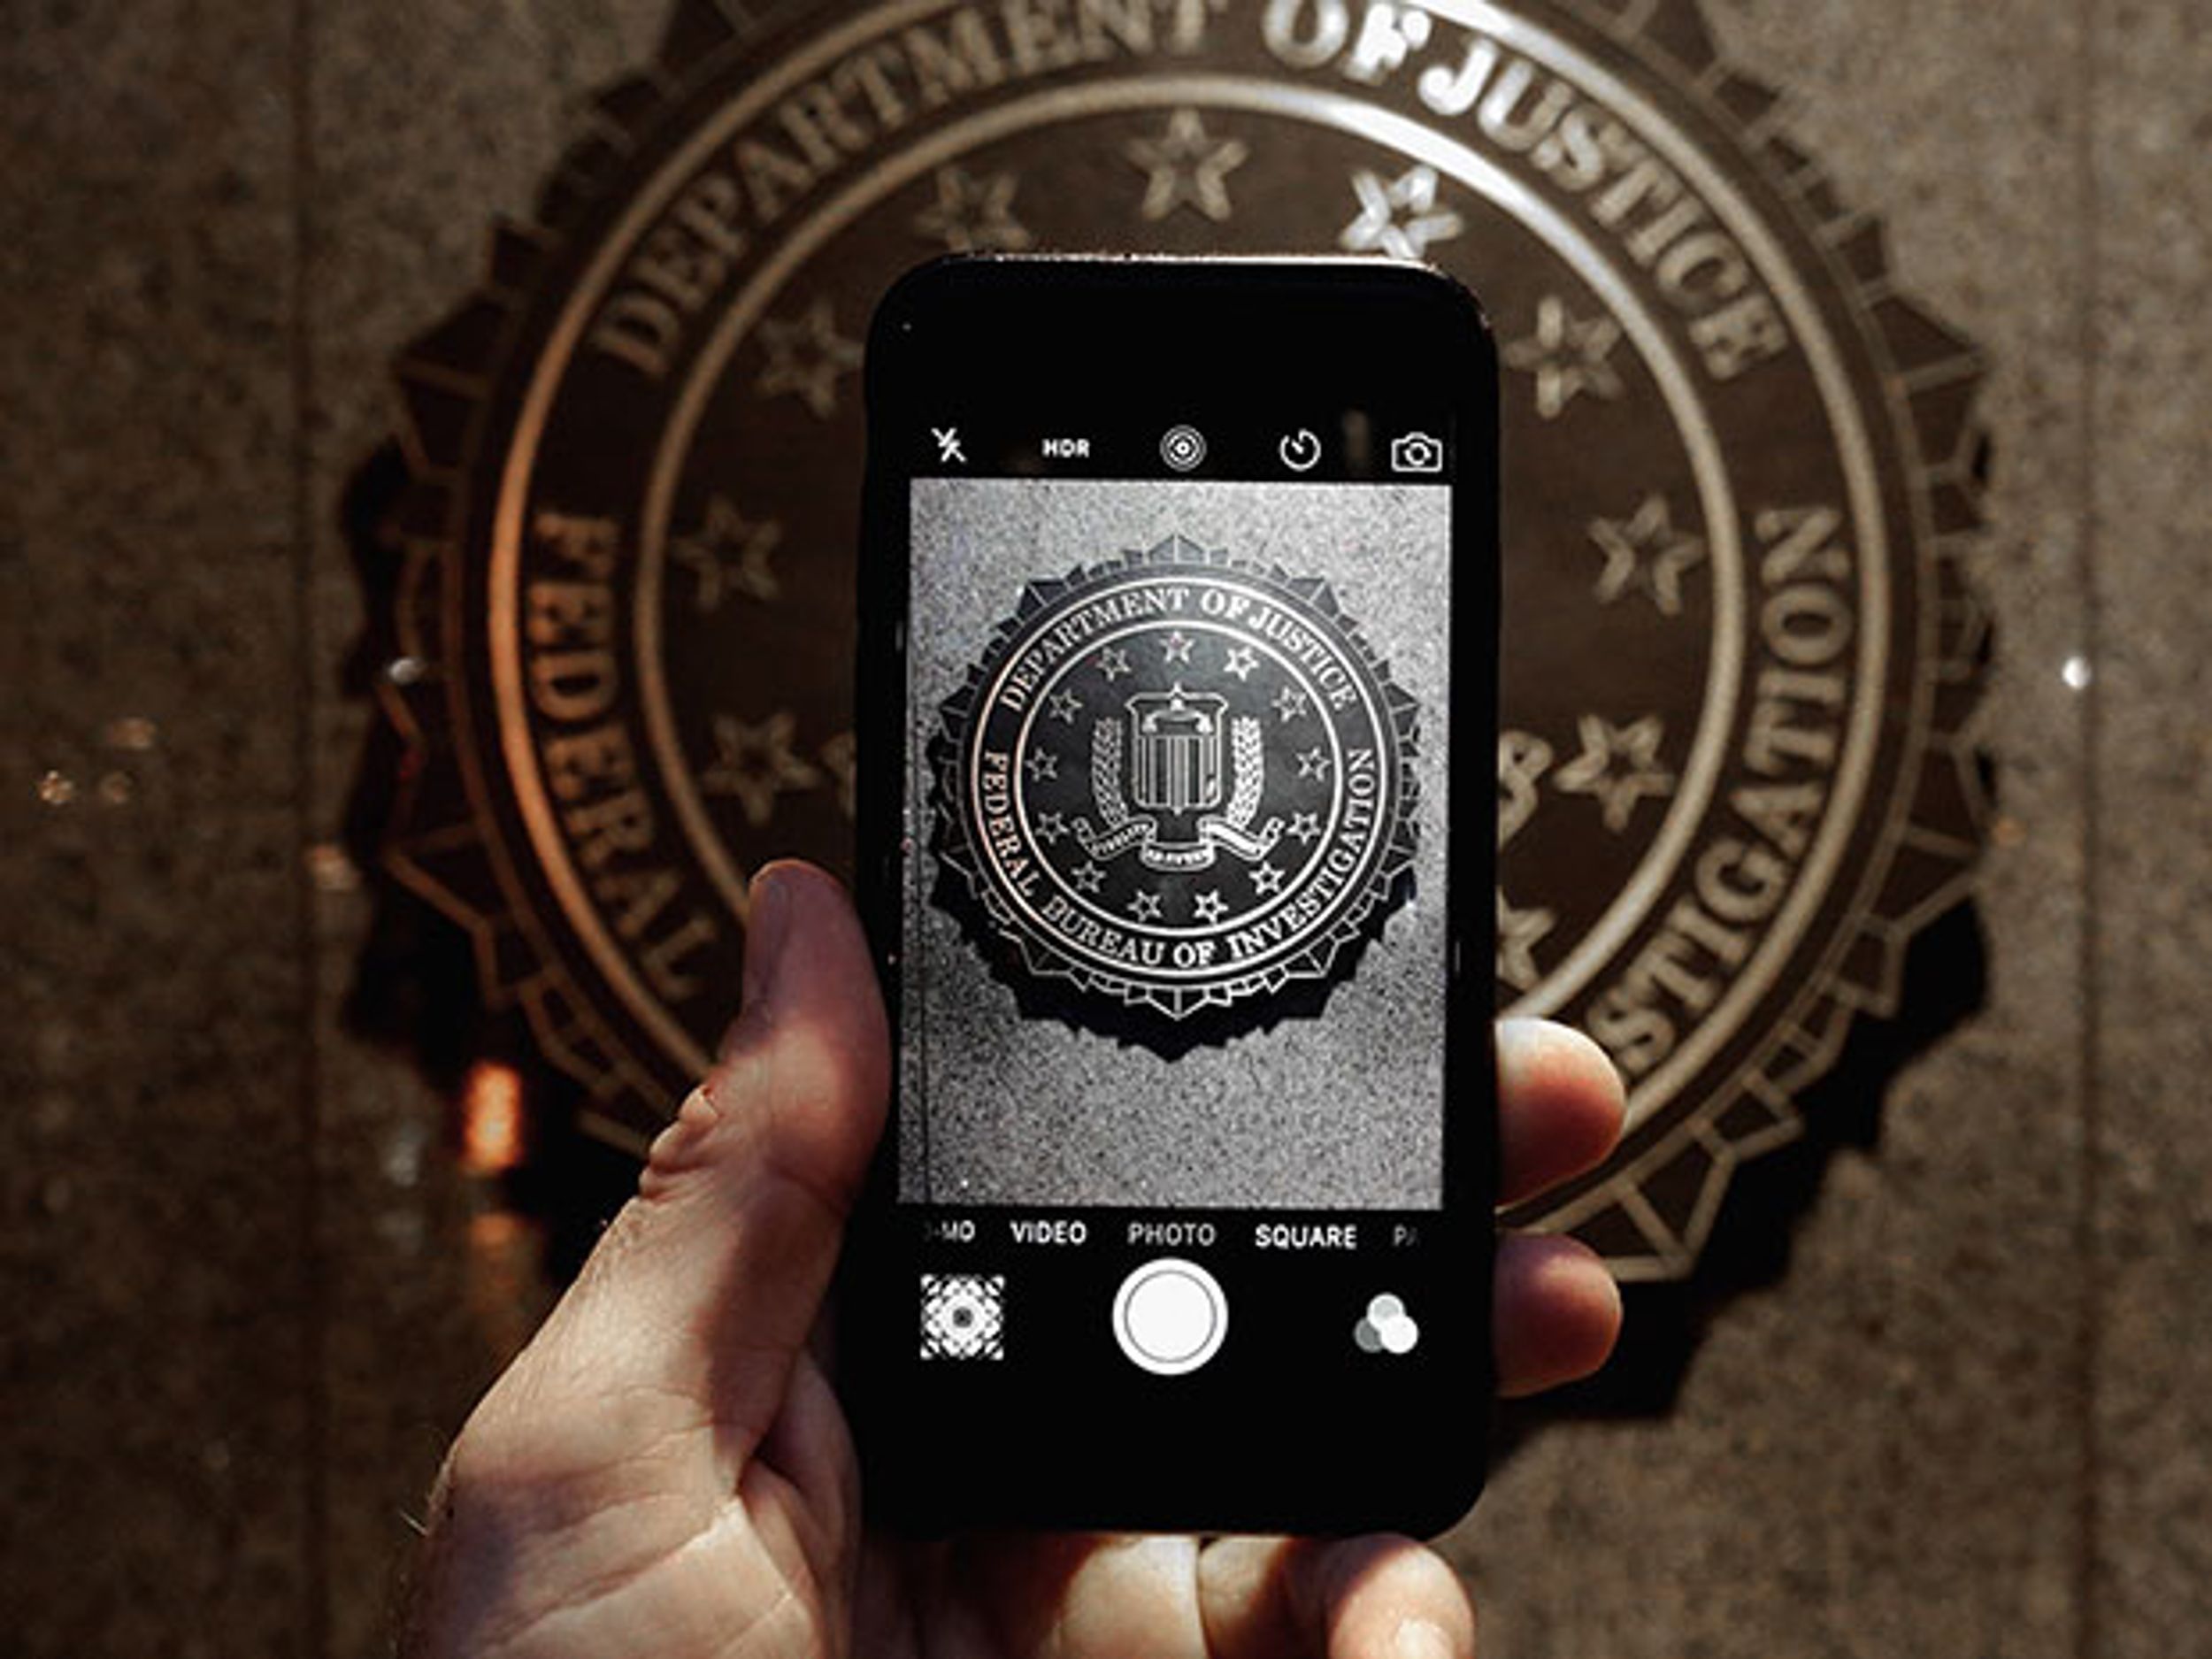 5 Ways Cyber Experts Think the FBI Might Have Hacked the San Bernardino iPhone